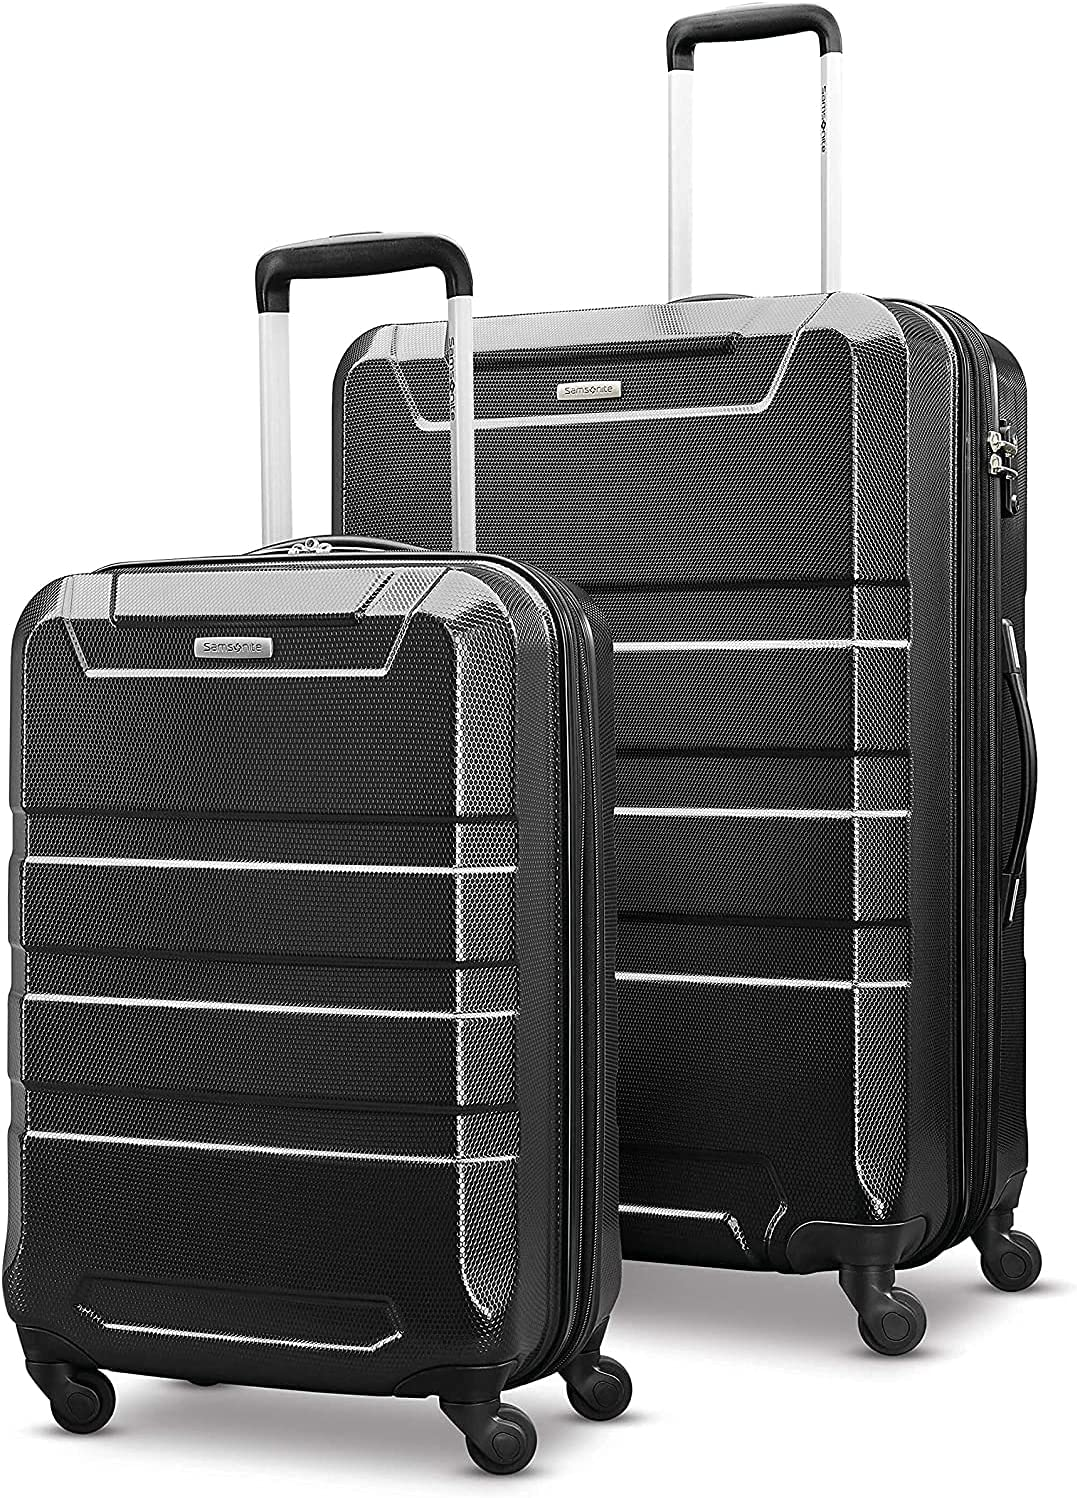 This Invoke collection has adopted Samsonite's stylish design, and because the bags are from 100% scratch-resistant ABS plastic, they will keep looking brand new for several decades. 
